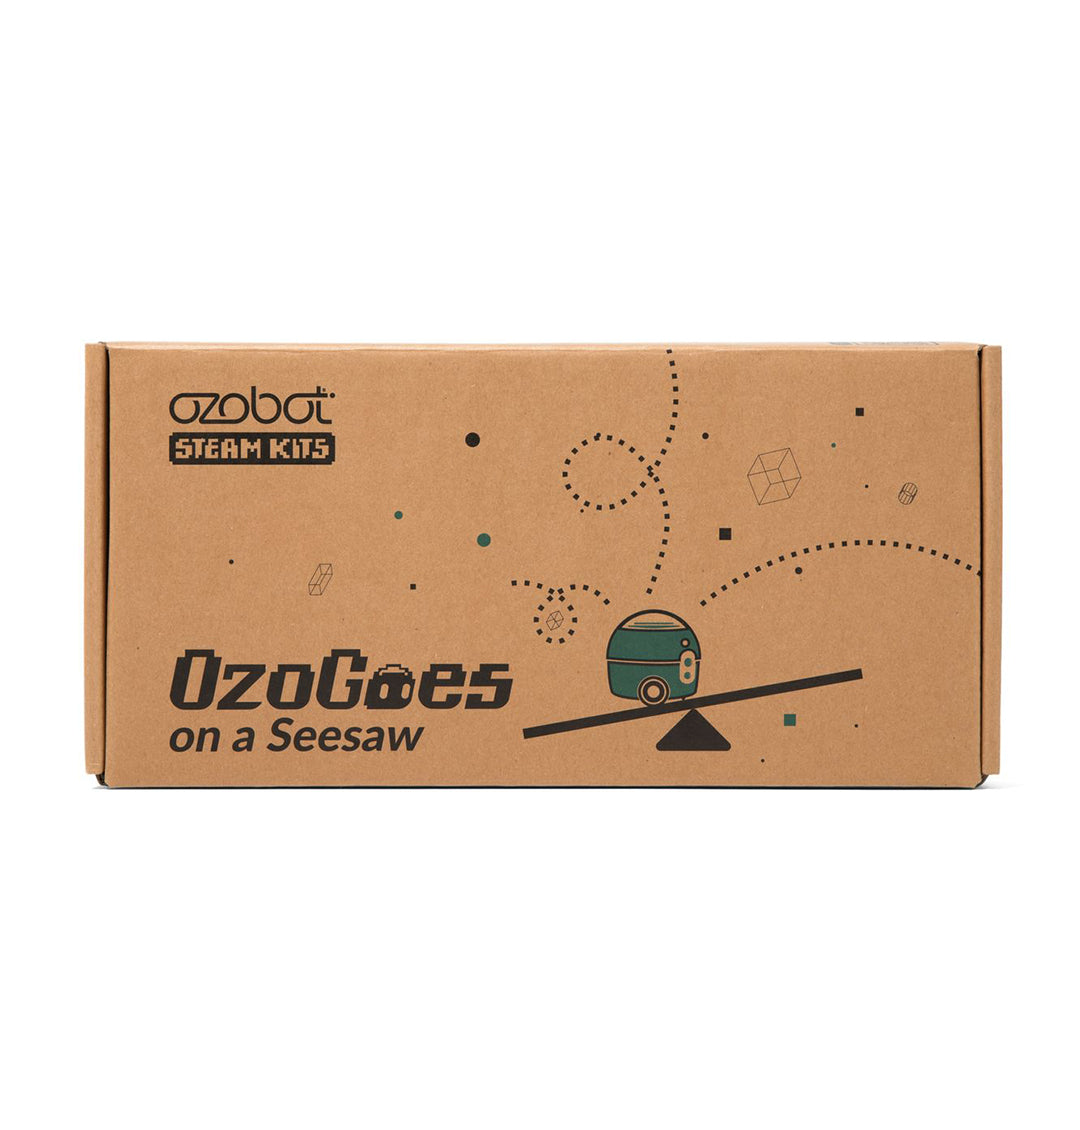 Ozogoes on a seesaw steam learning kit by Ozobot - fun stem activities for kids by Ozobot